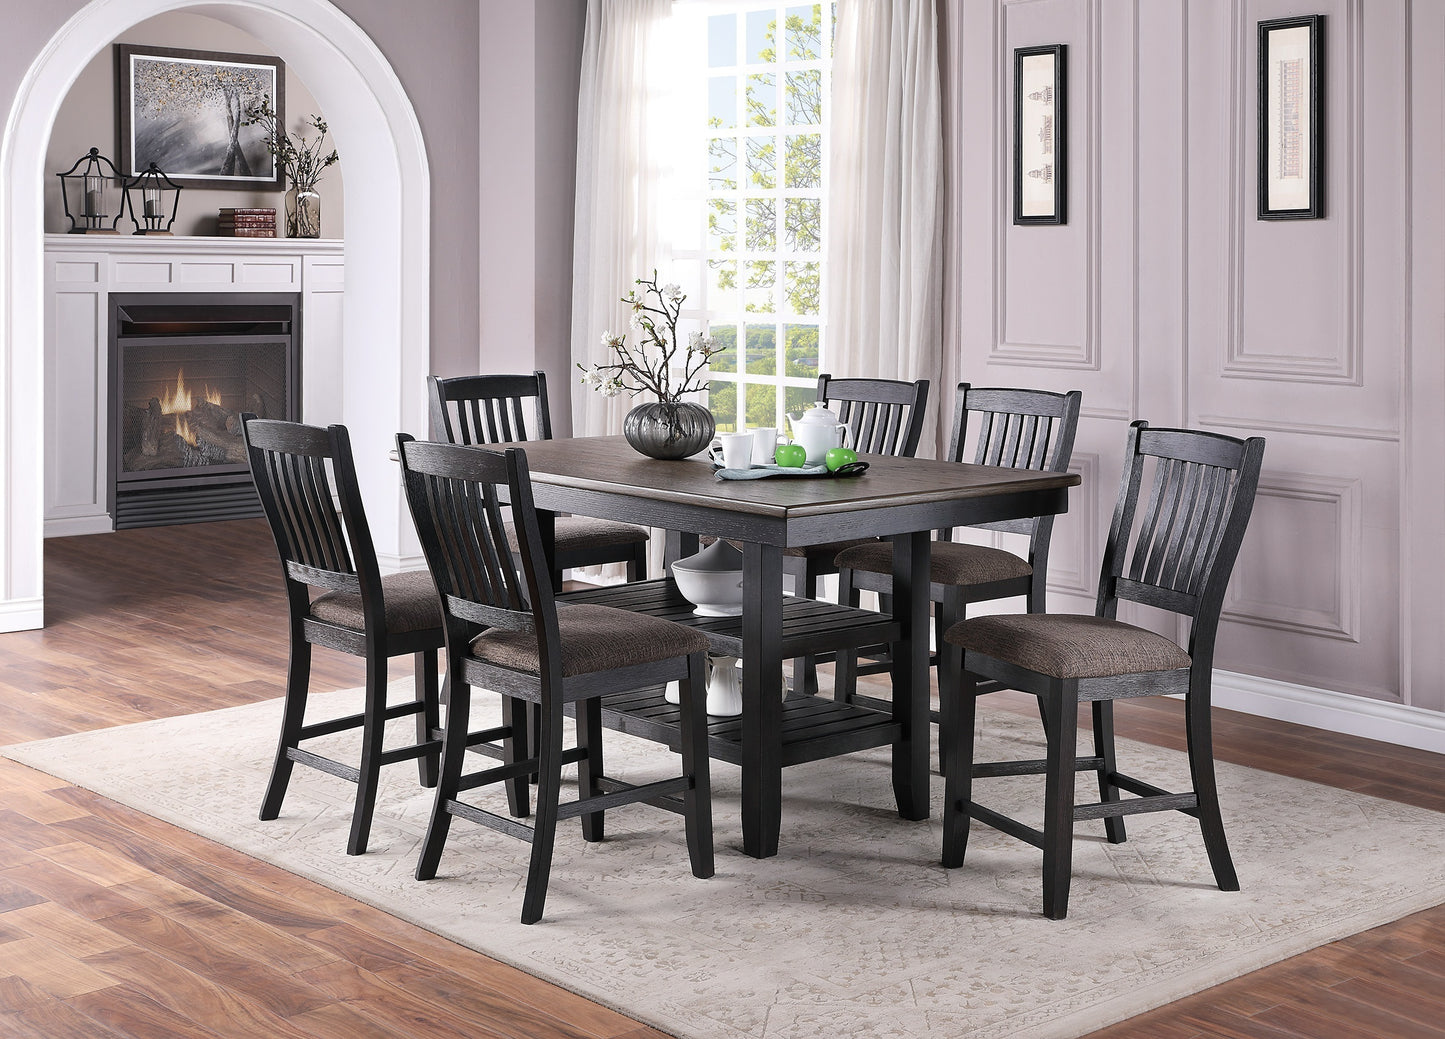 Dark Coffee Classic Wood Kitchen Dining Room Set of 2 High Chairs Fabric upholstered Seat Unique Design Back Counter Height Chairs